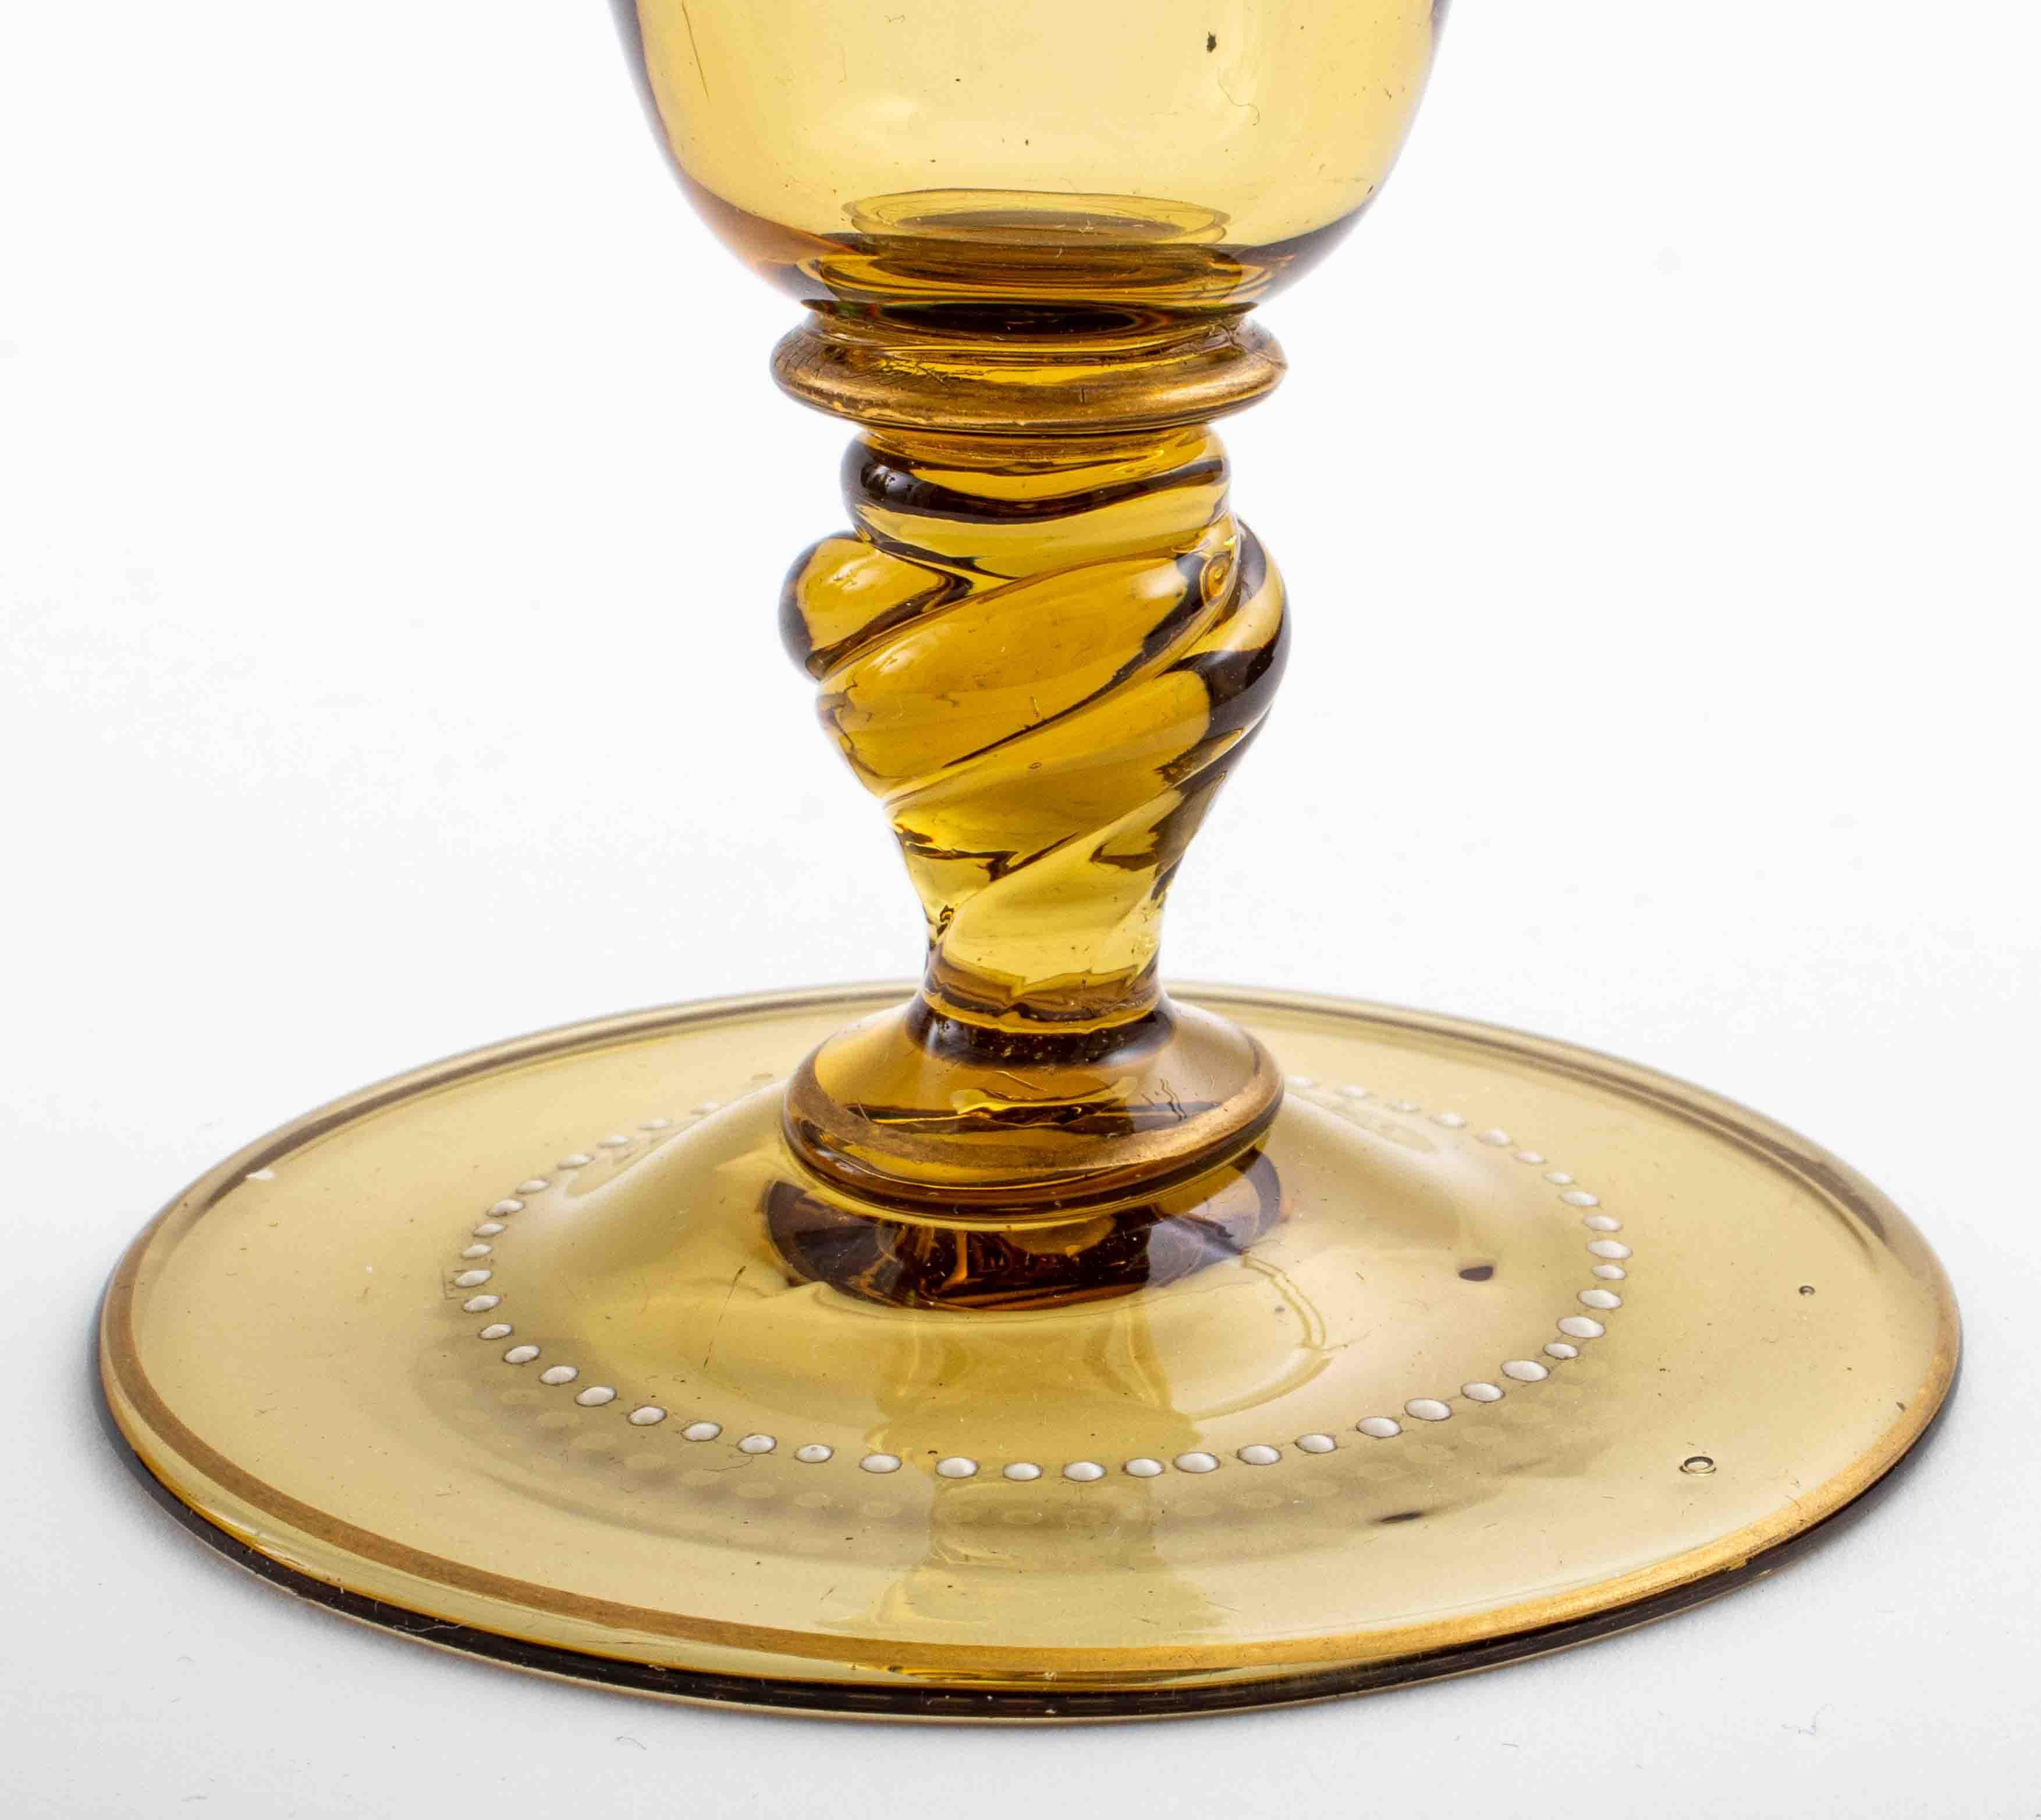 Bohemian Crystal Glass Decanters & Goblet, 3 In Good Condition For Sale In New York, NY